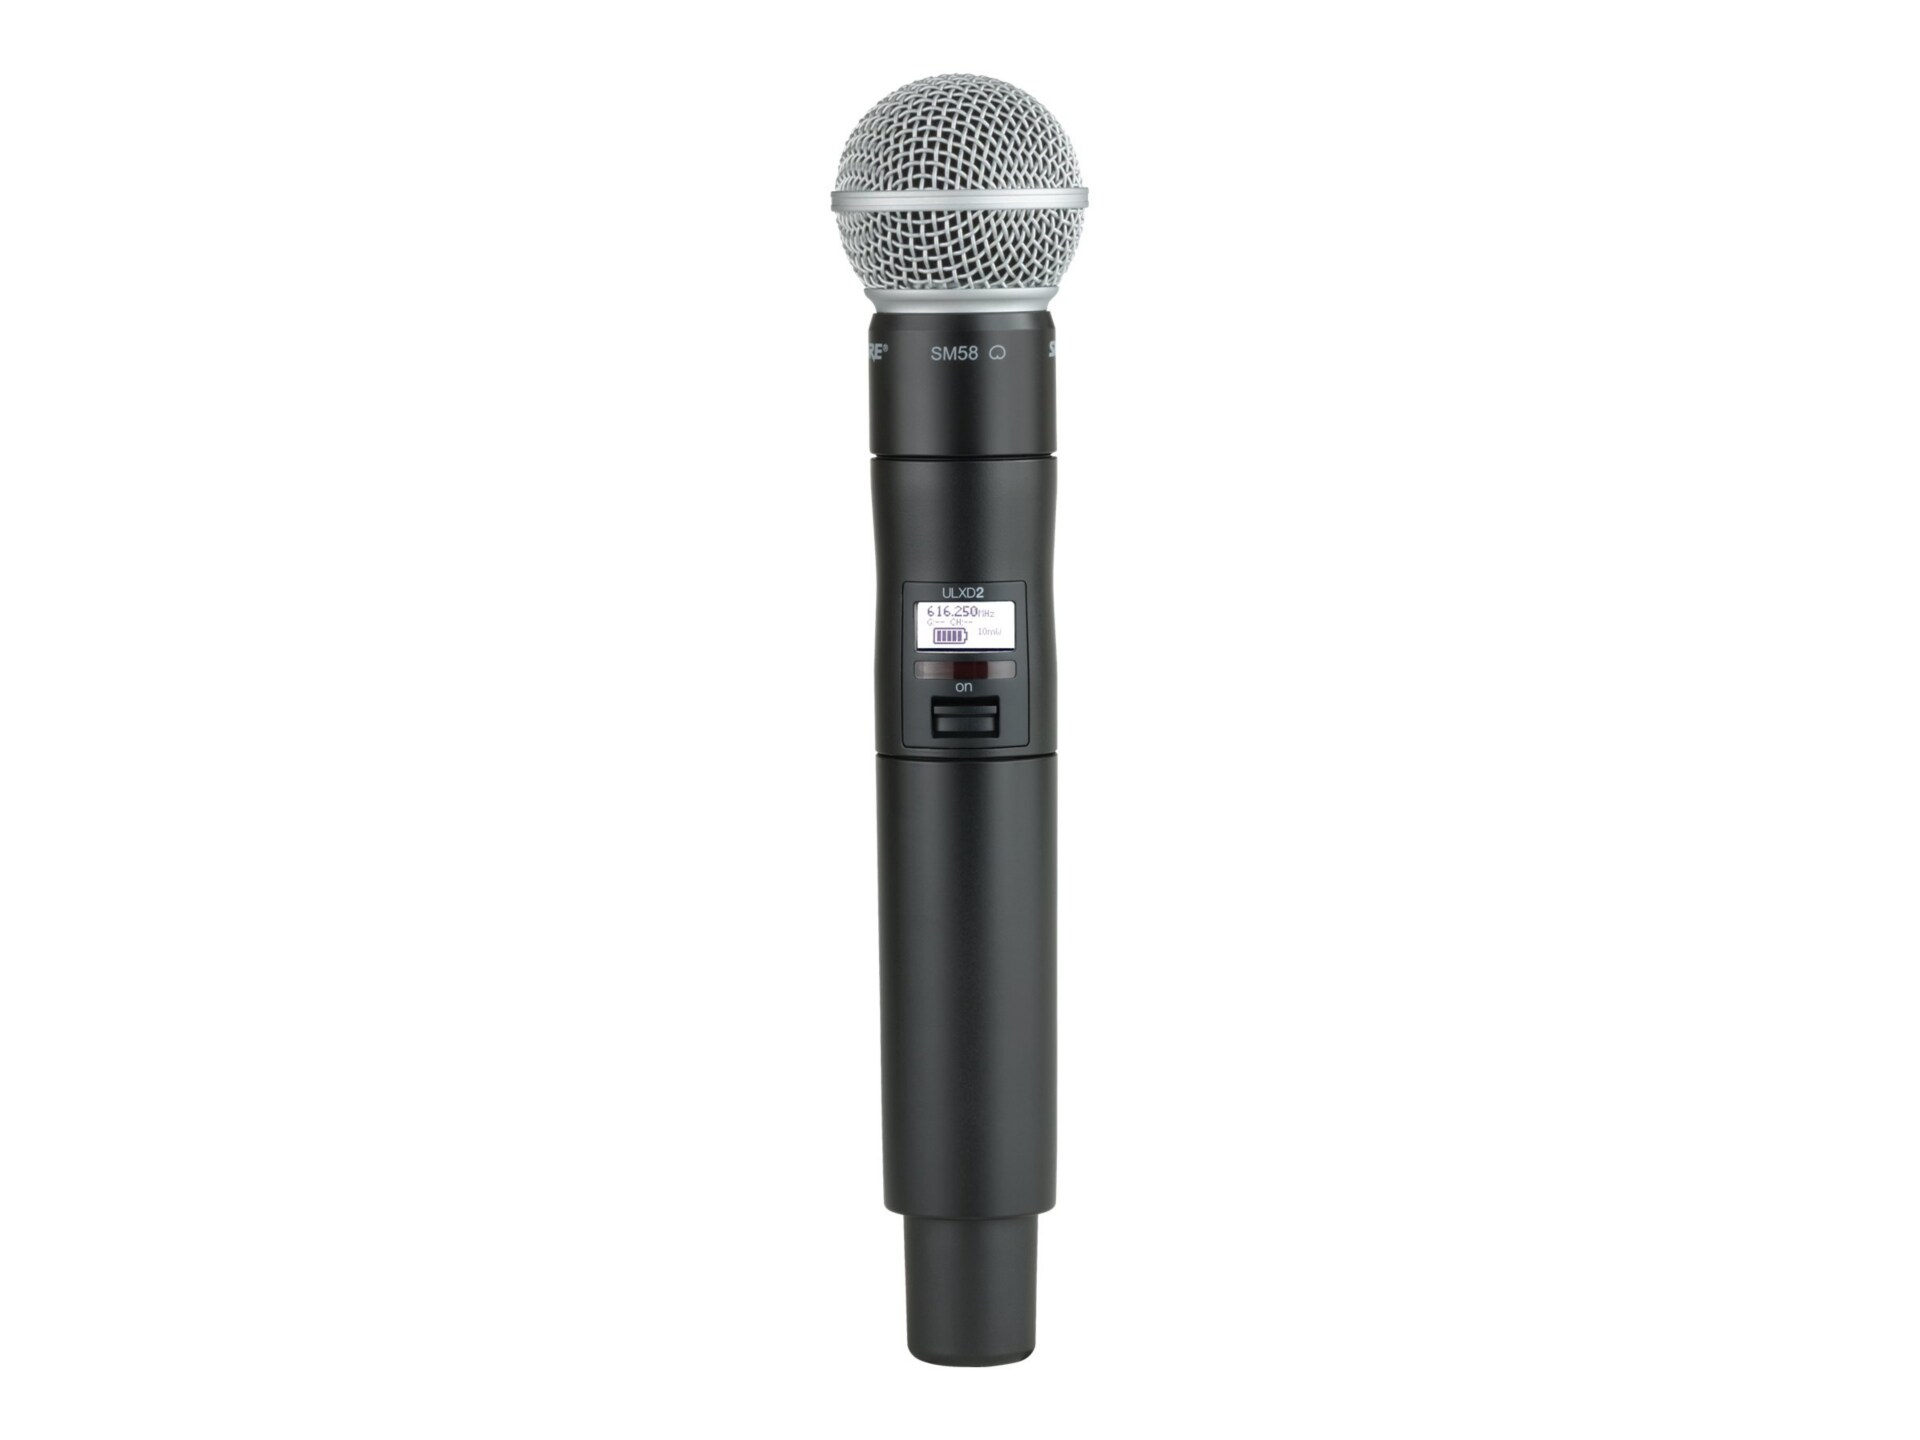 Shure Digital Handheld Transmitter with SM58 Capsule for ULX-D Digital Wire